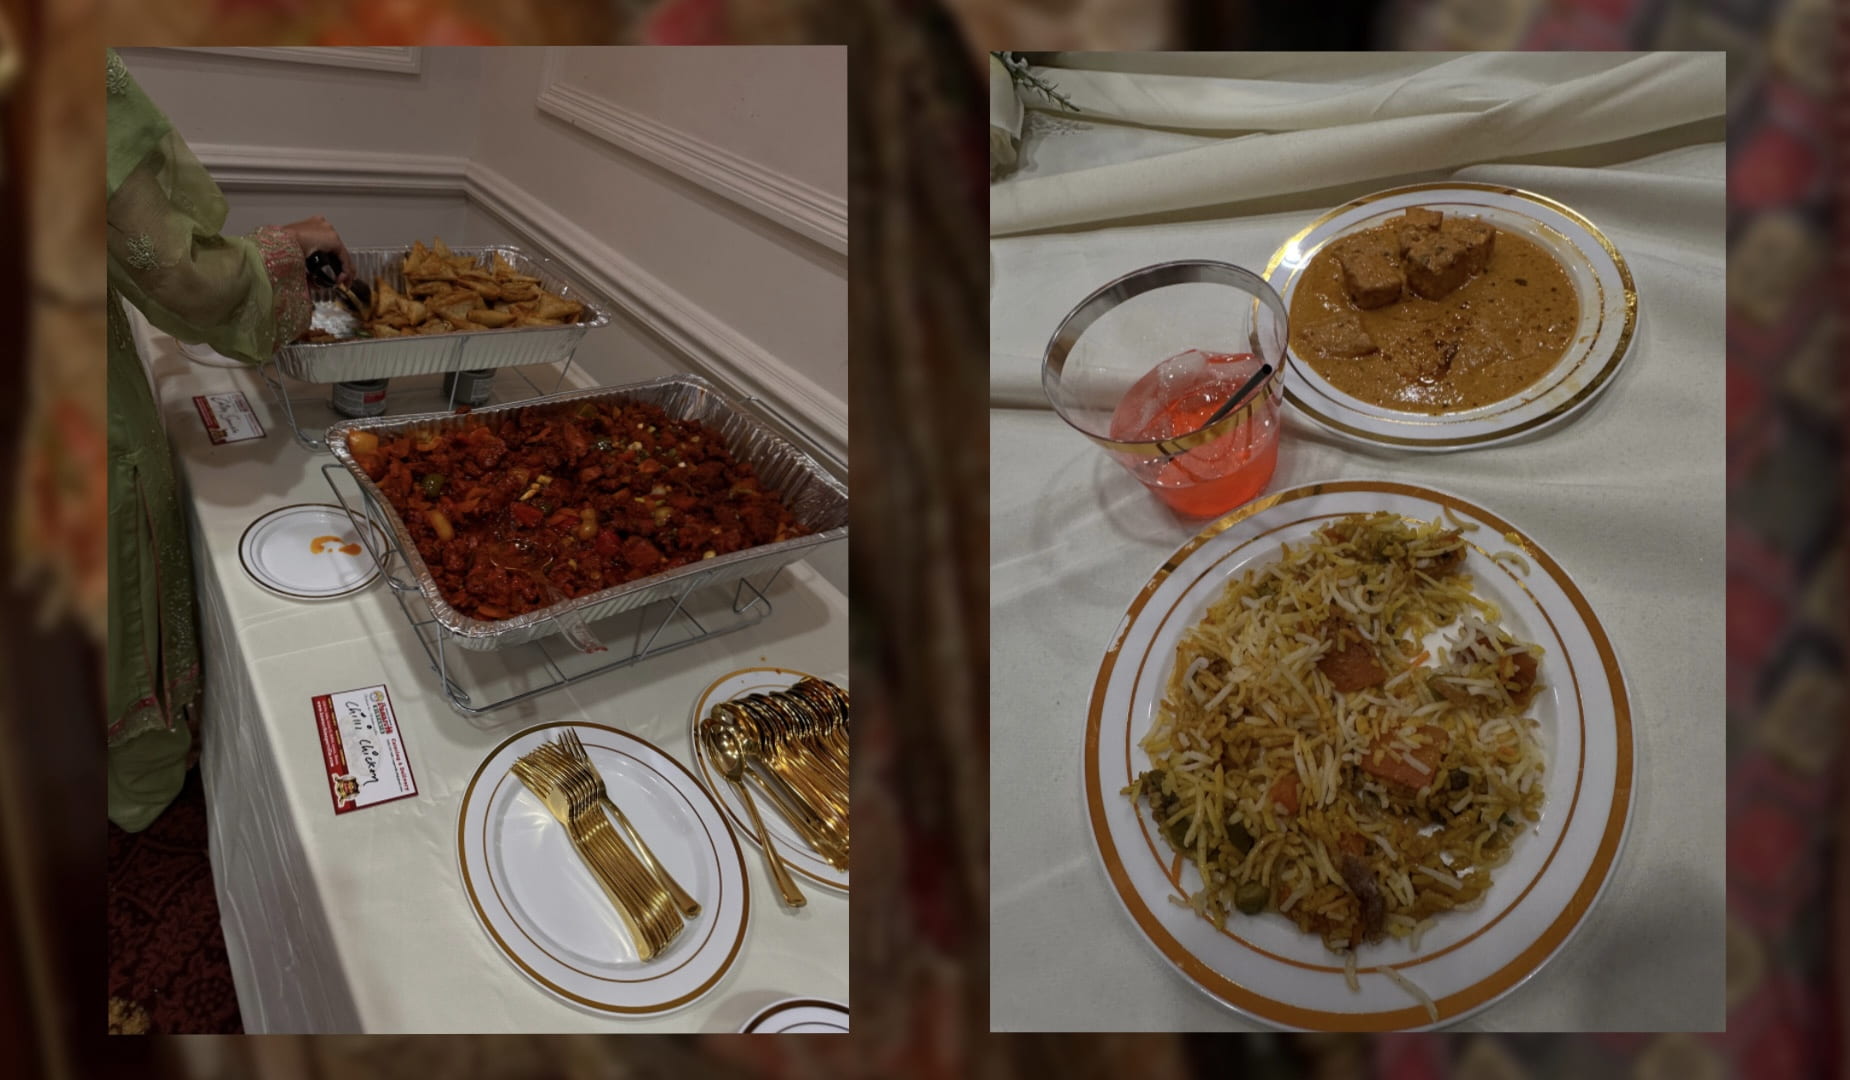 Two images of Indian food.